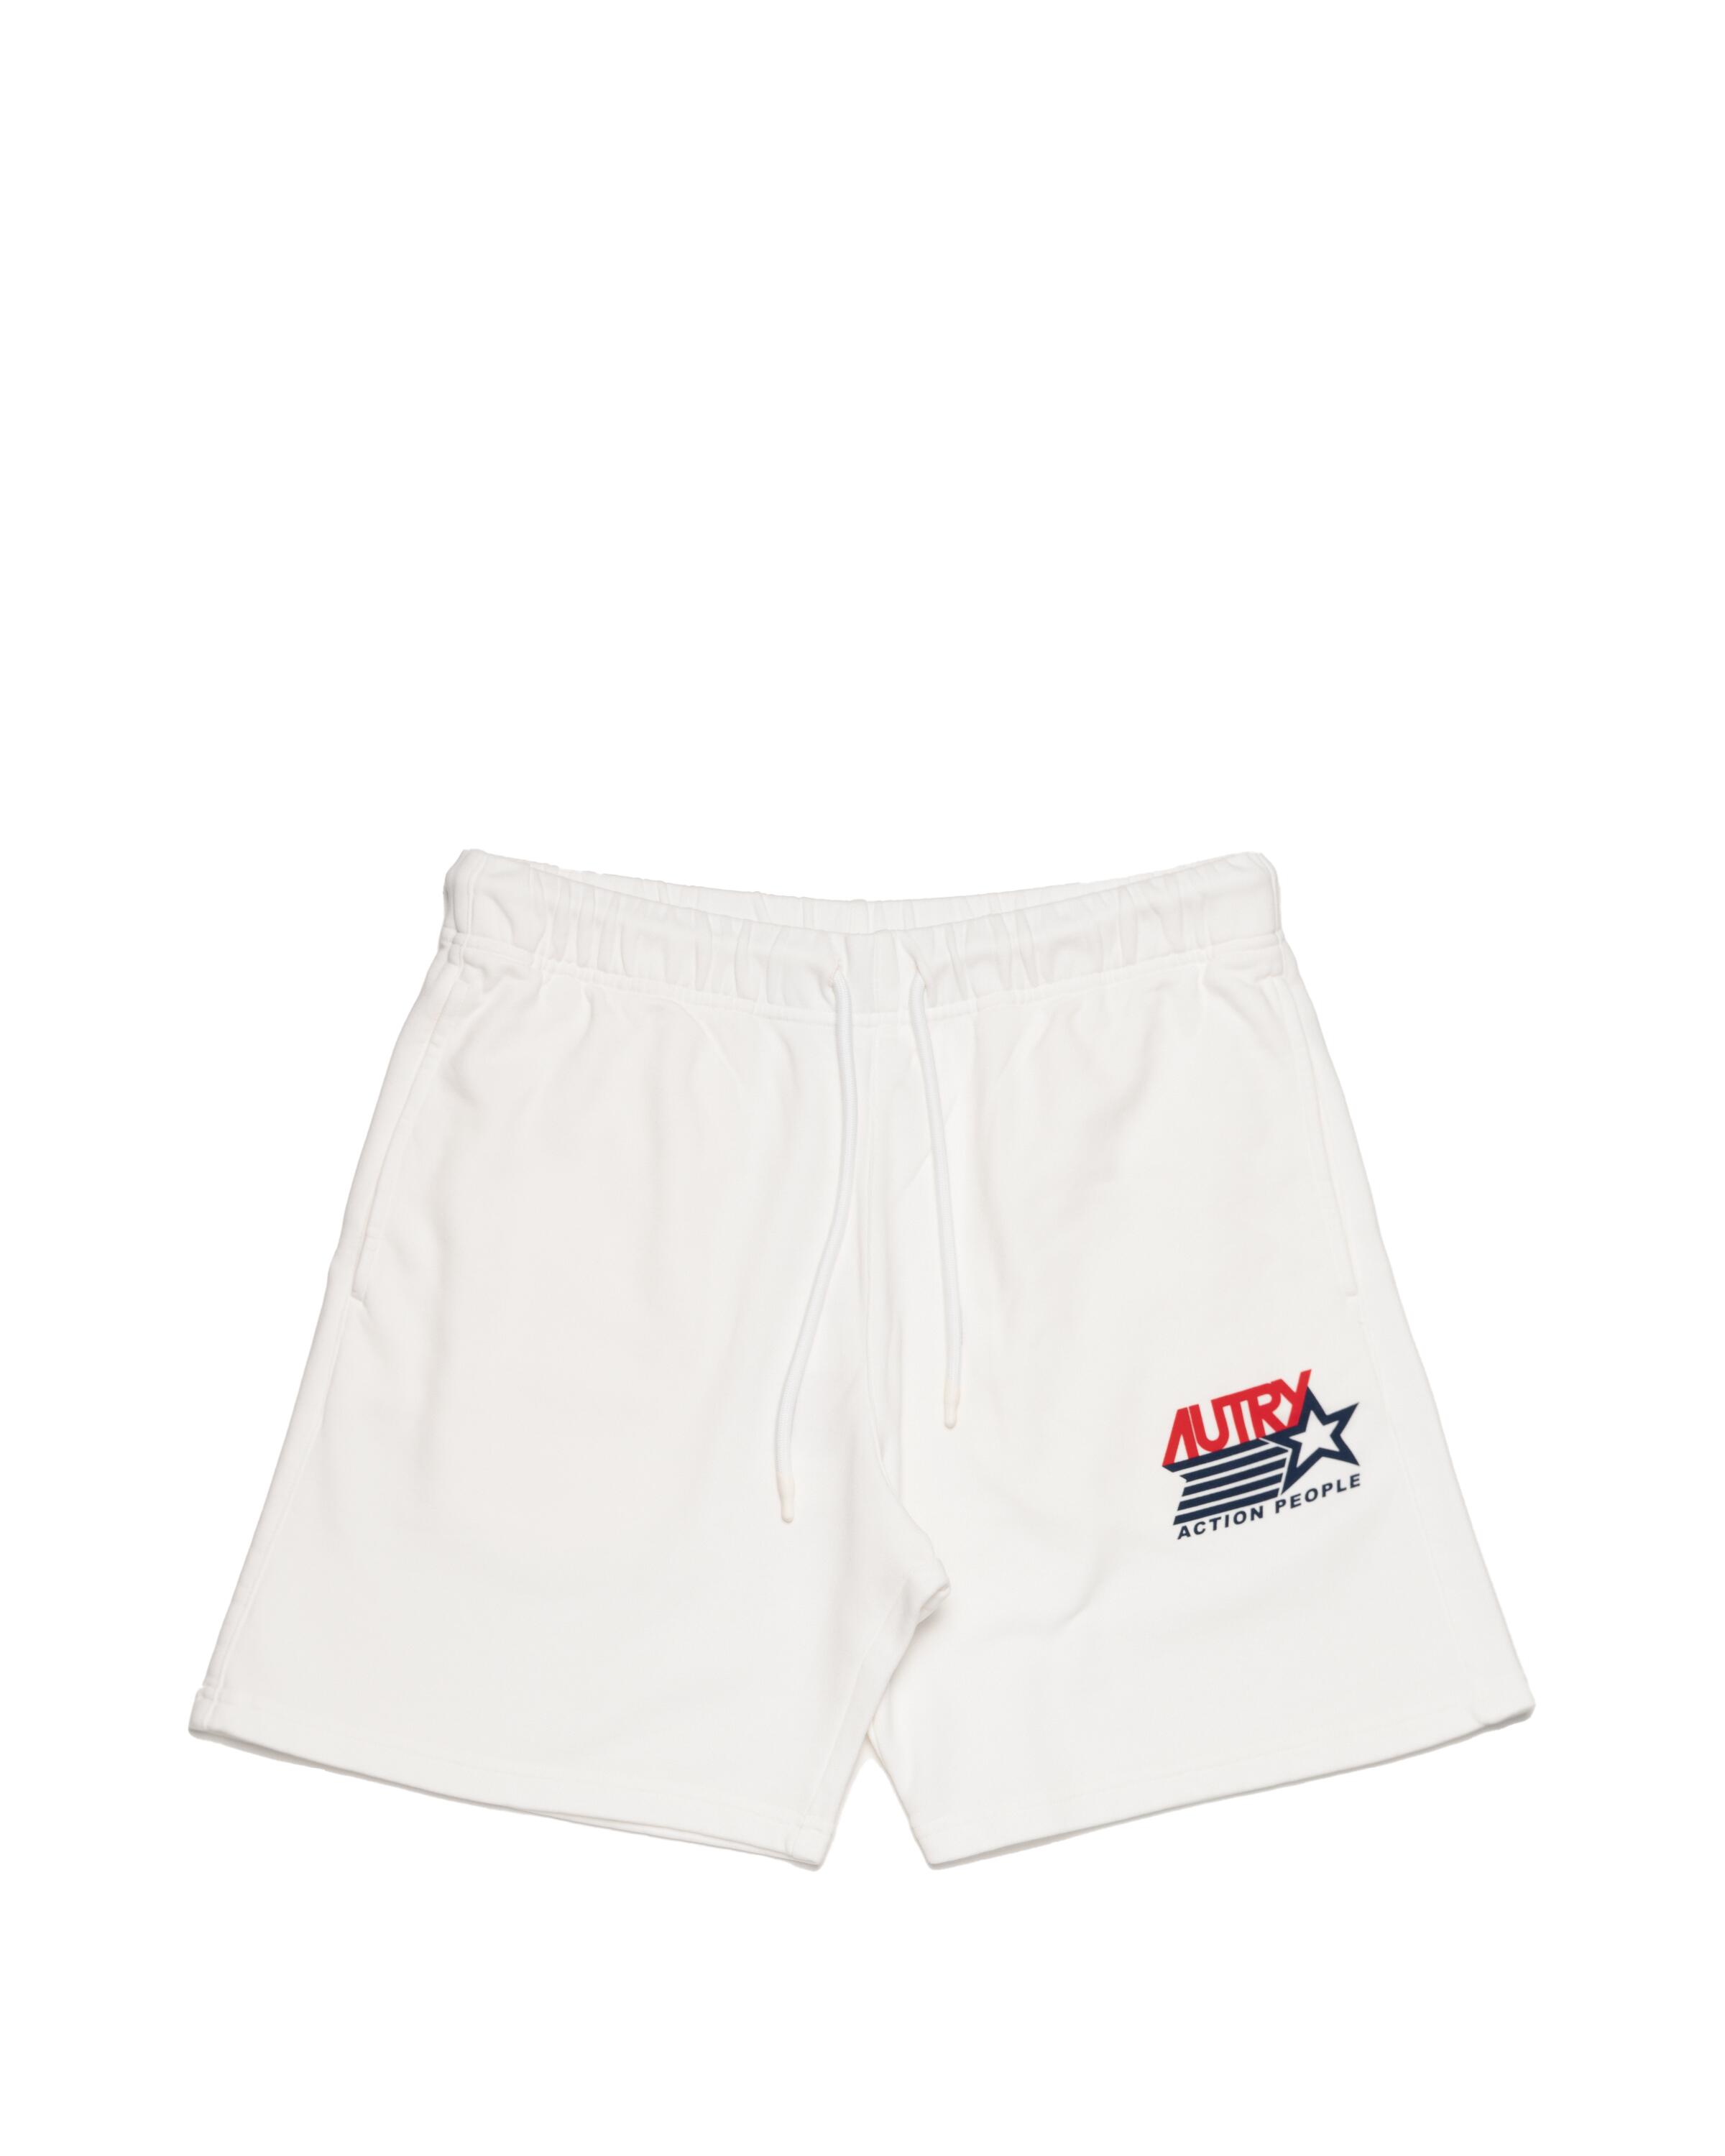 autry action shoes shorts iconic